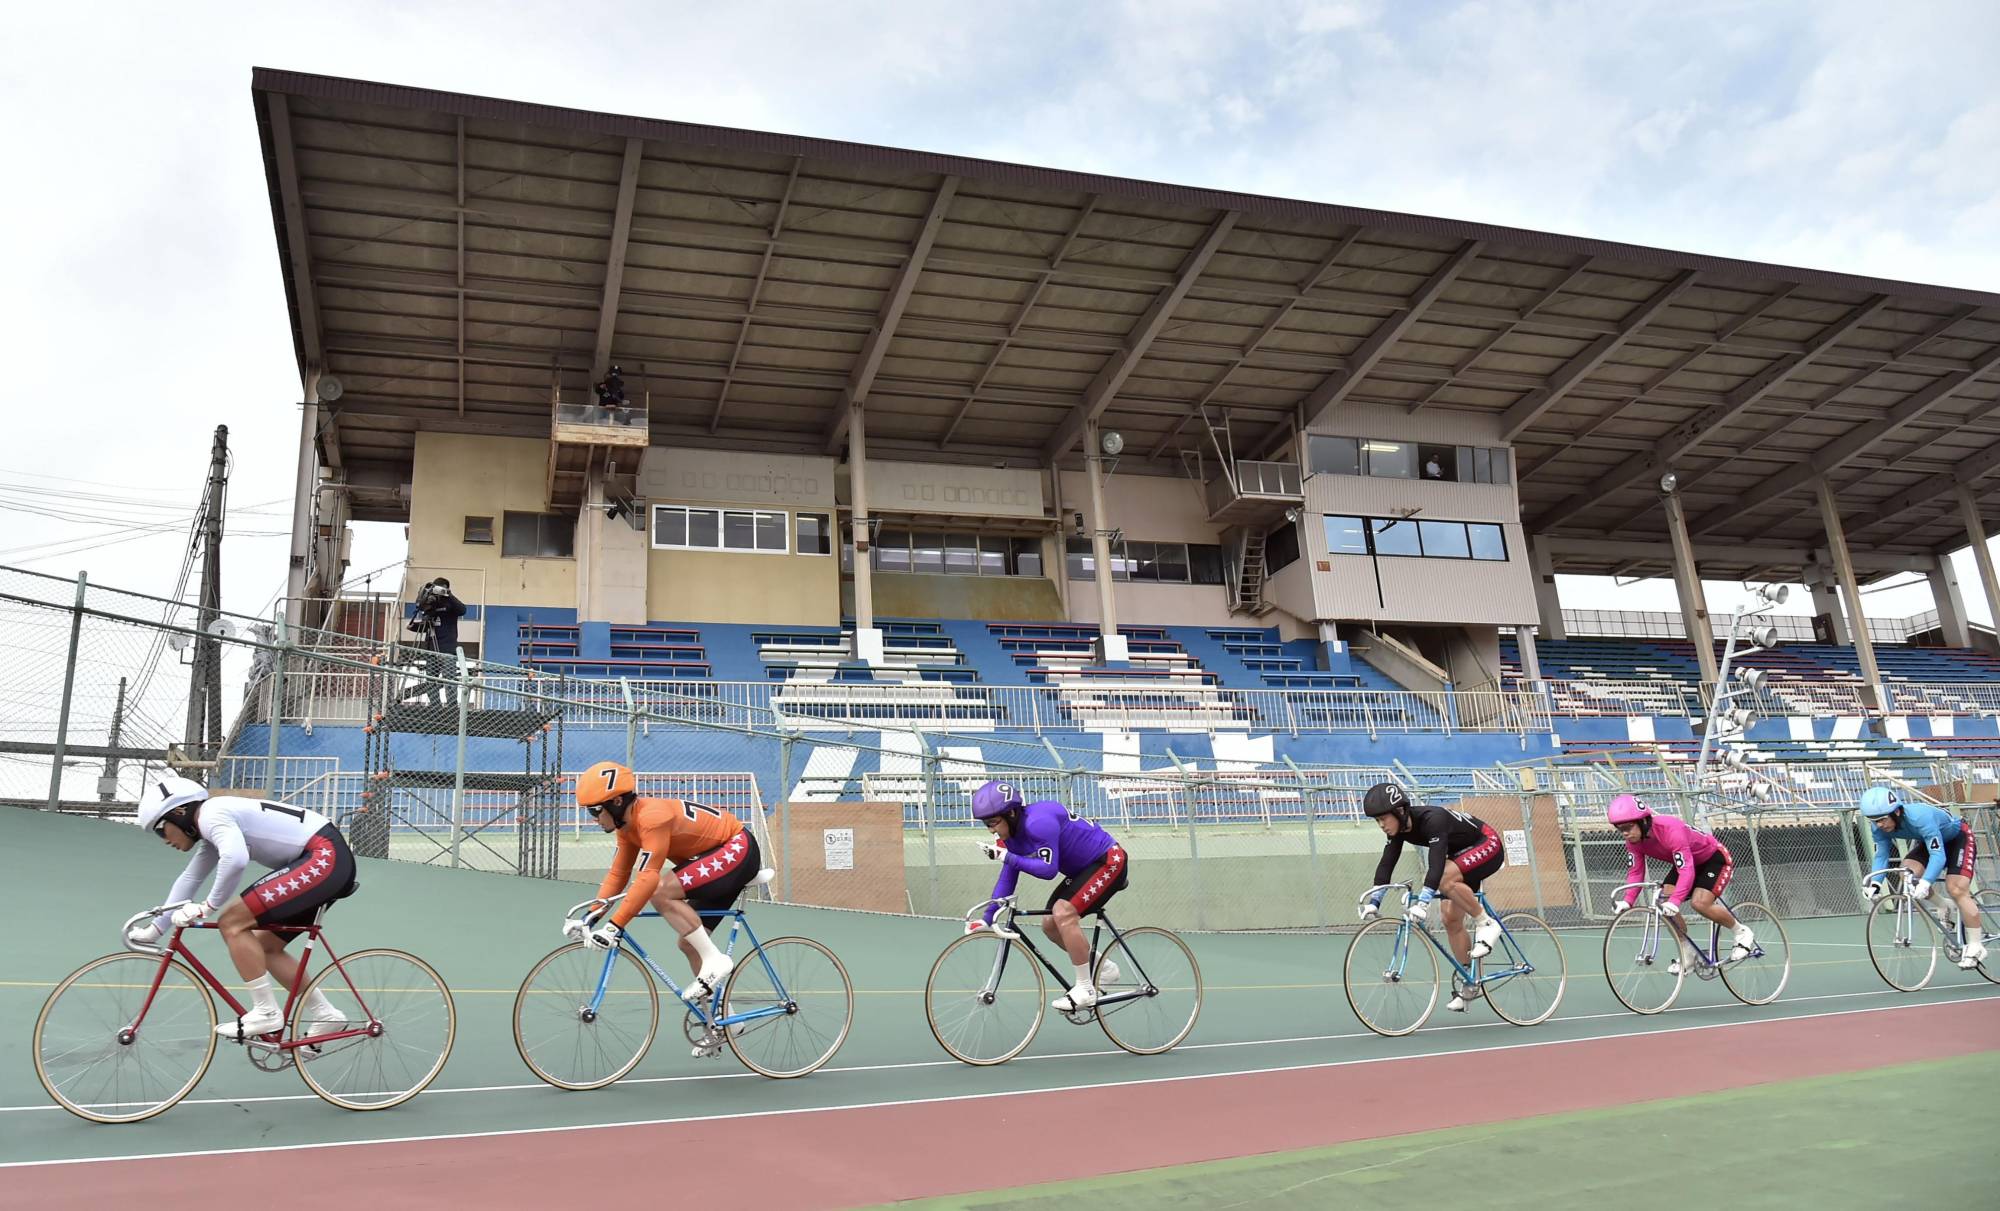 With races held multiple times per day year-round, professional keirin riders compete more frequently than athletes in any other individual sport. | KYODO